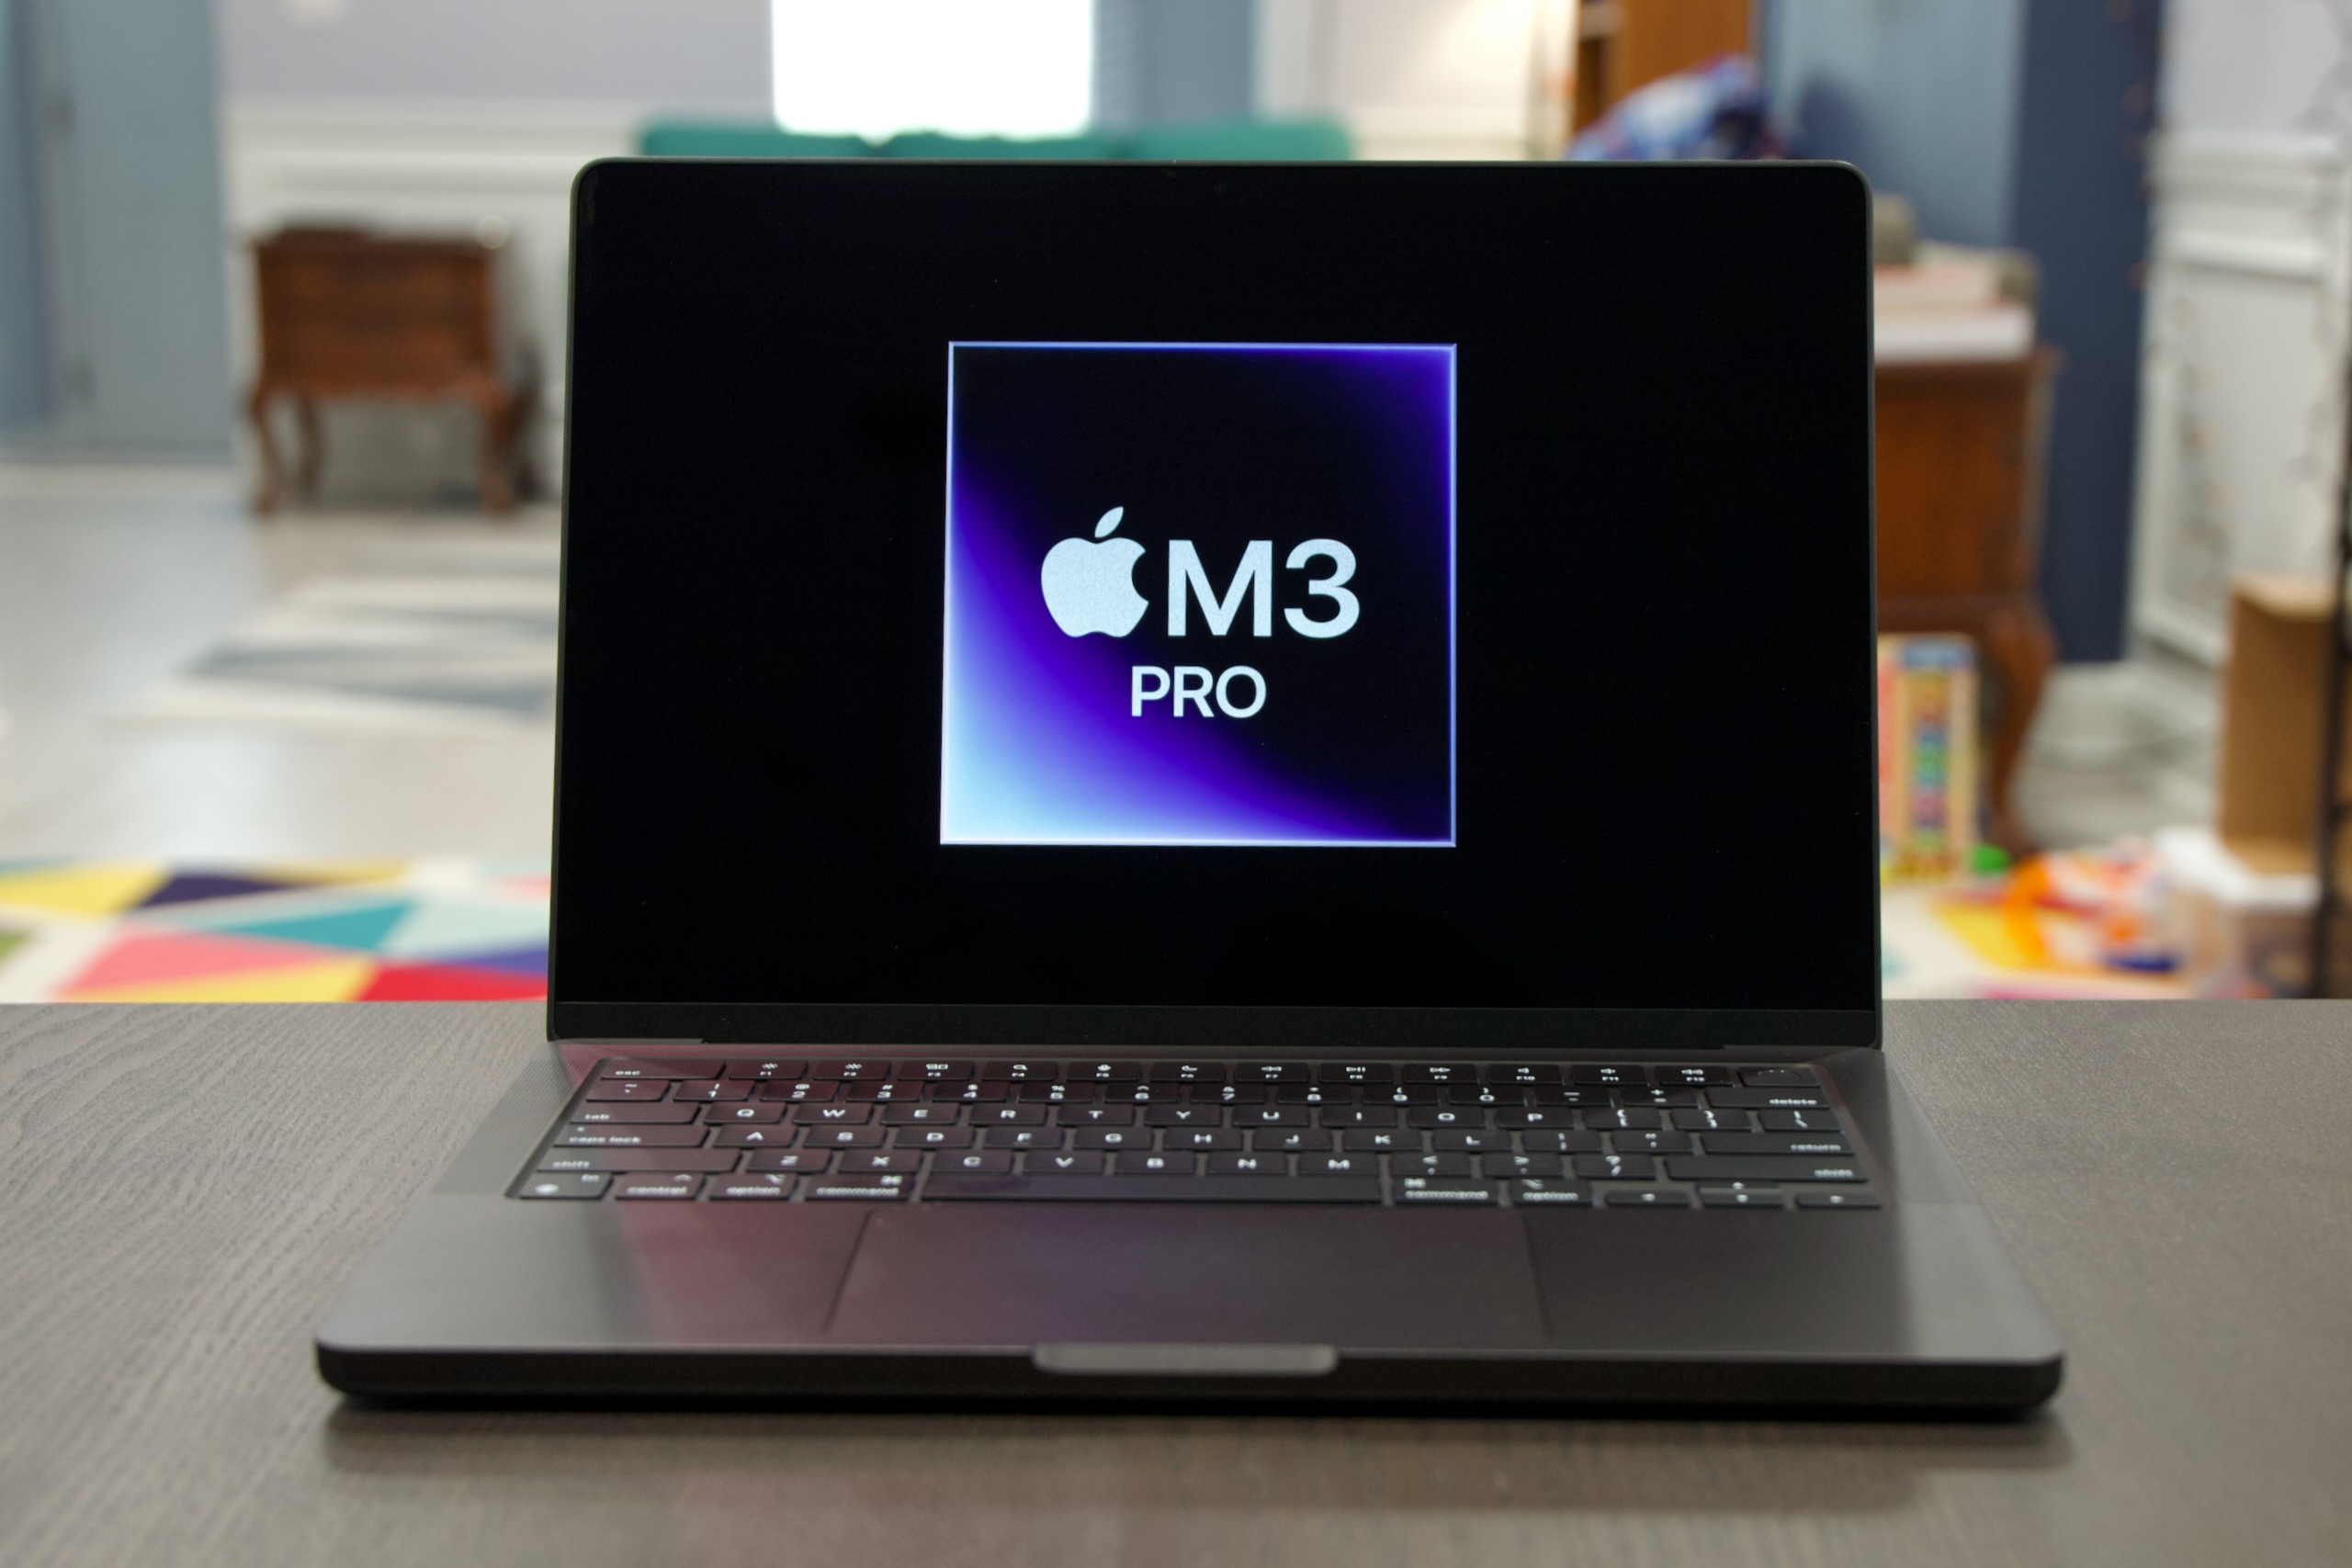 Testing Apple's M3 Pro: More efficient, but performance is a step